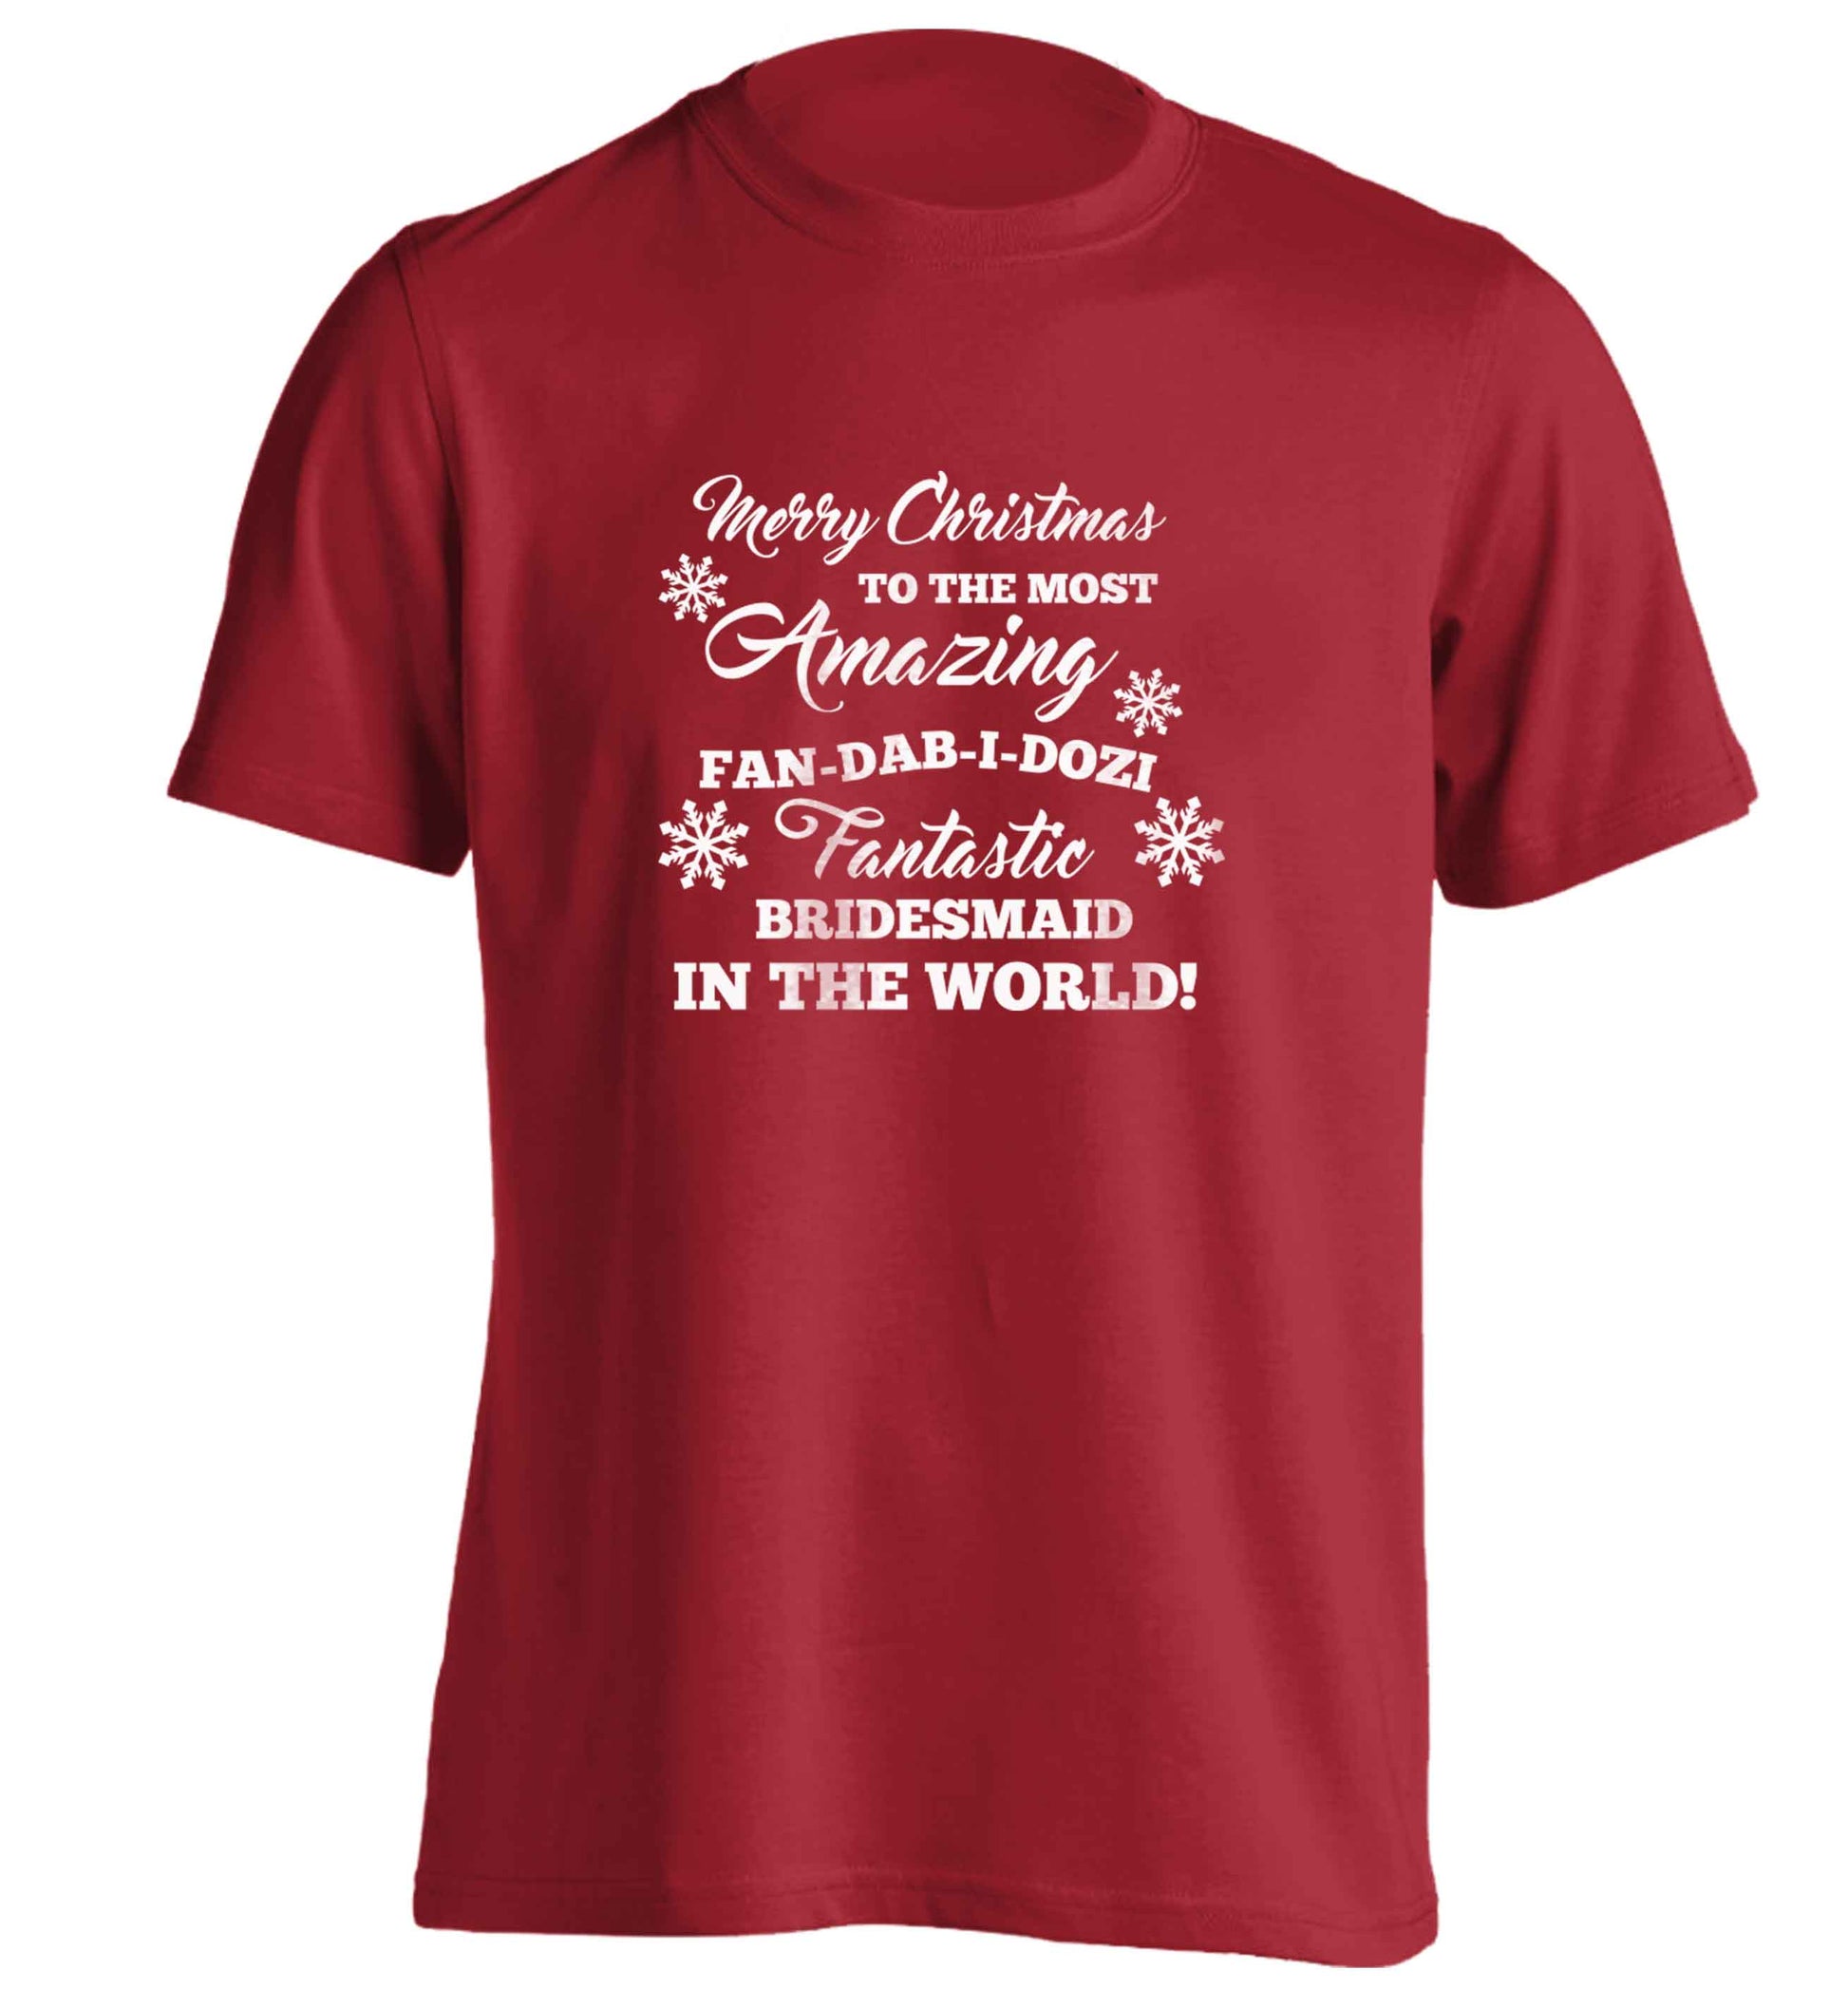 Merry Christmas to the most amazing fan-dab-i-dozi fantasic bridesmaid in the world adults unisex red Tshirt 2XL